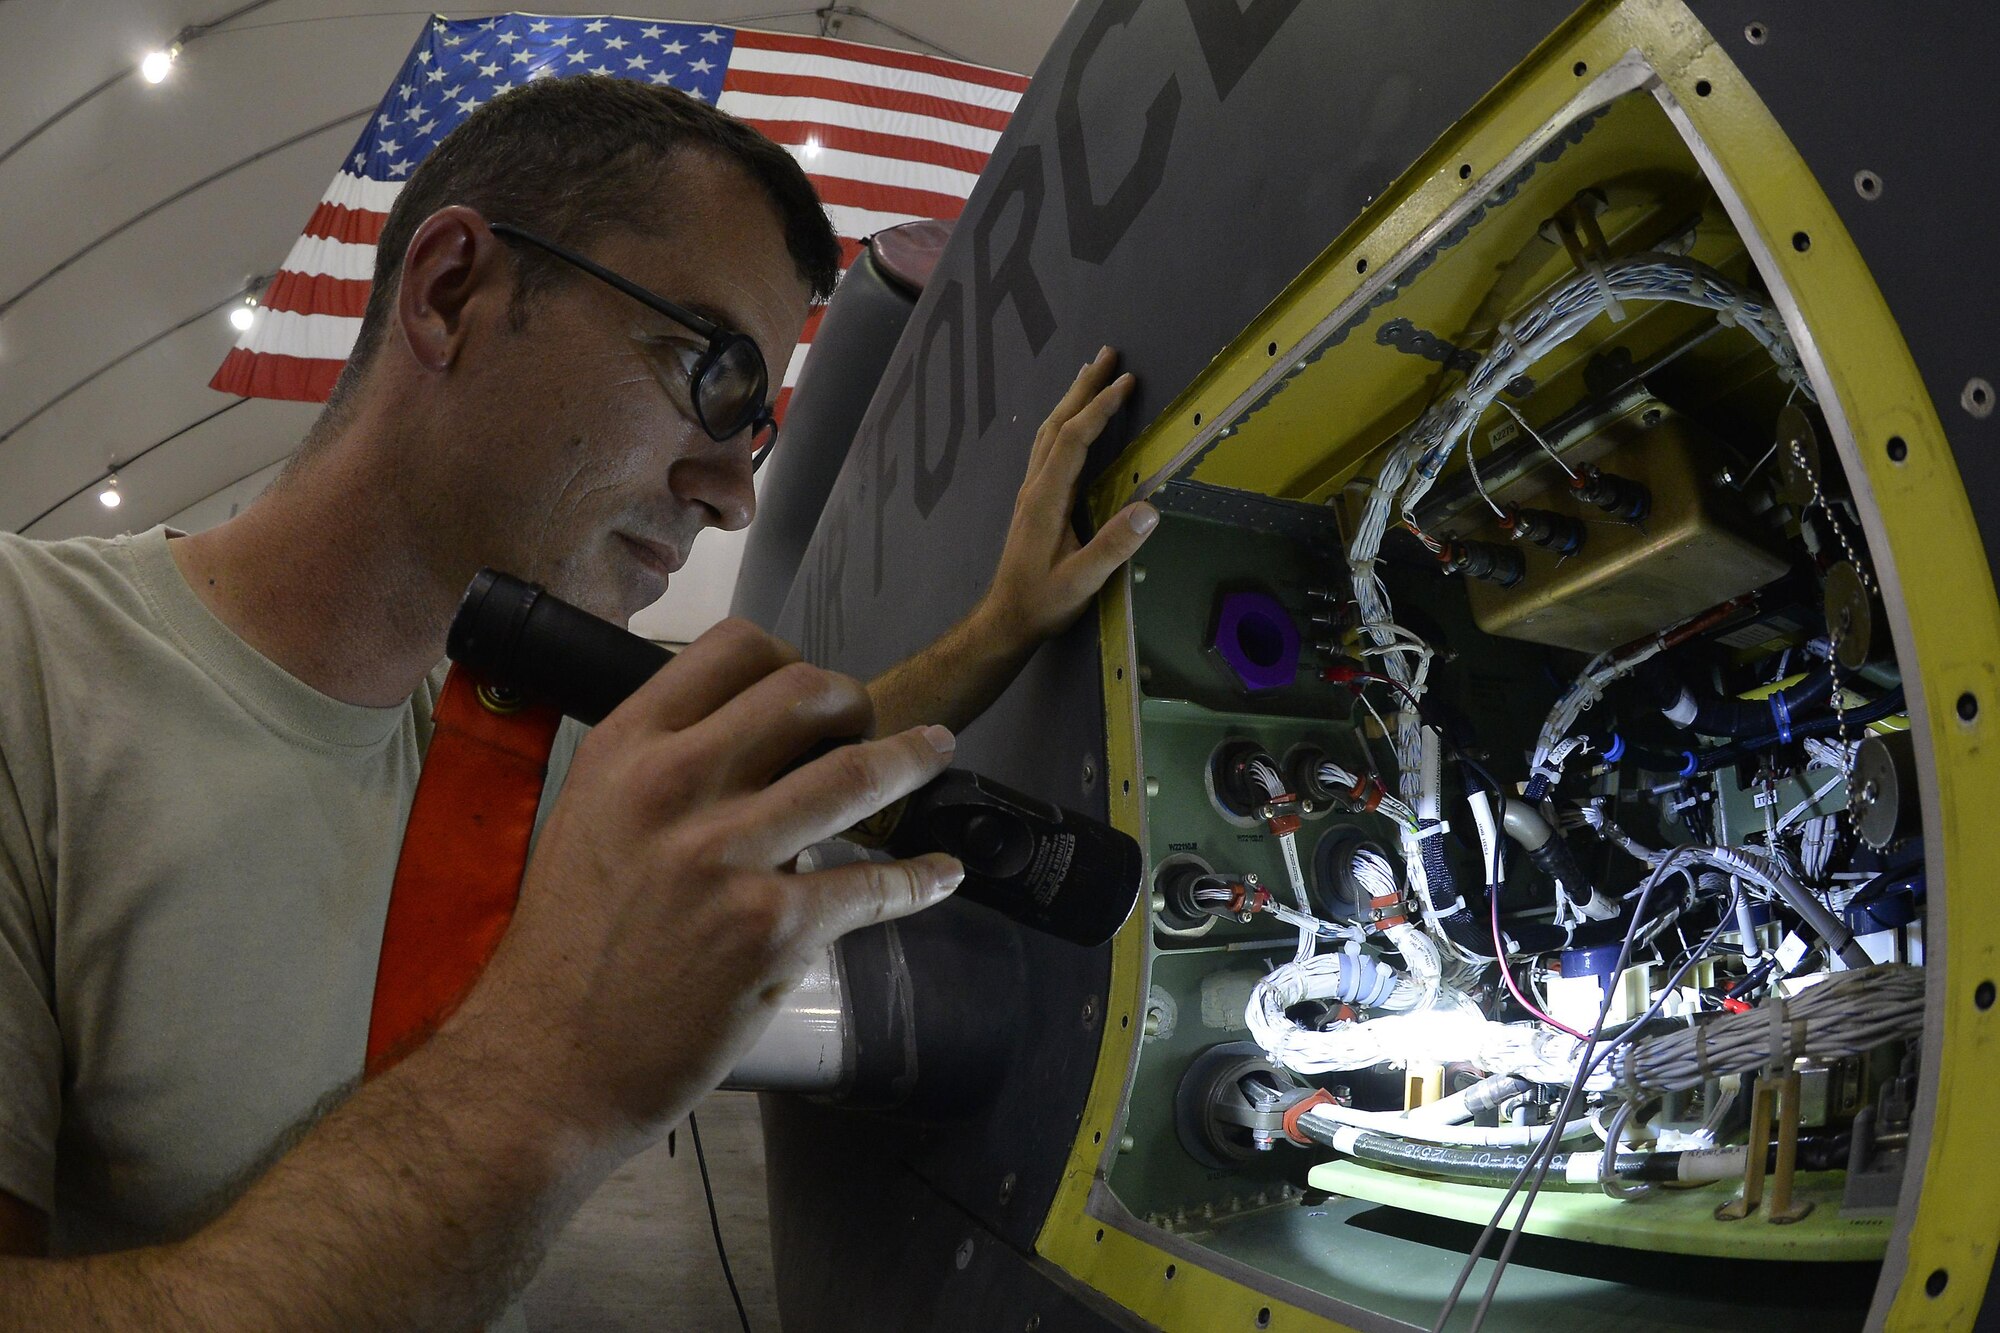 Tech. Sgt. Jon troubleshoots an RQ-4 Global Hawk for stray voltage during an inspection at an undisclosed location in Southwest Asia September 18, 2015. Jon is a flightline expeditor assigned to the 380th Expeditionary Aircraft Maintenance Squadron. (U.S. Air Force photo/Tech. Sgt. Christopher Boitz)